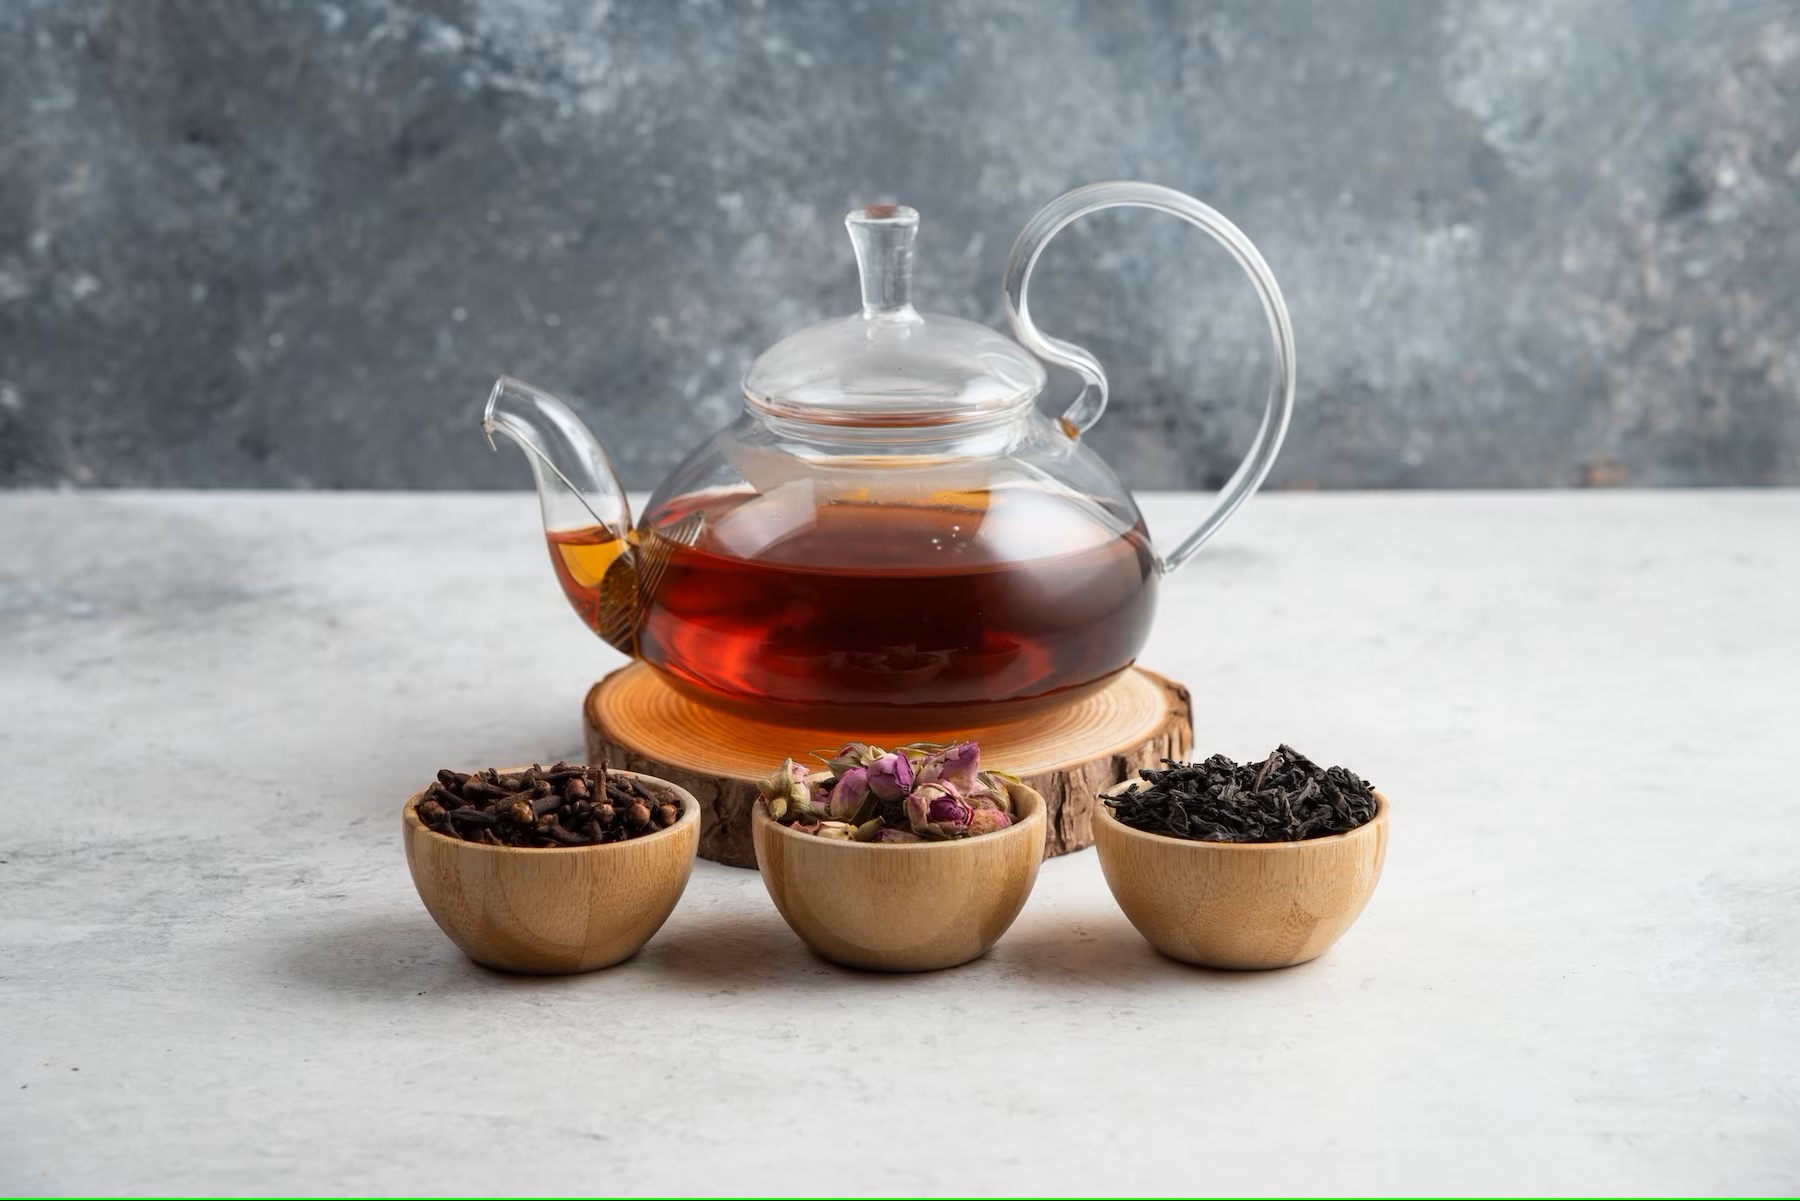 a-glass-teapot-with-wooden-bowls-of-loose-teas_114579-38595.jpg